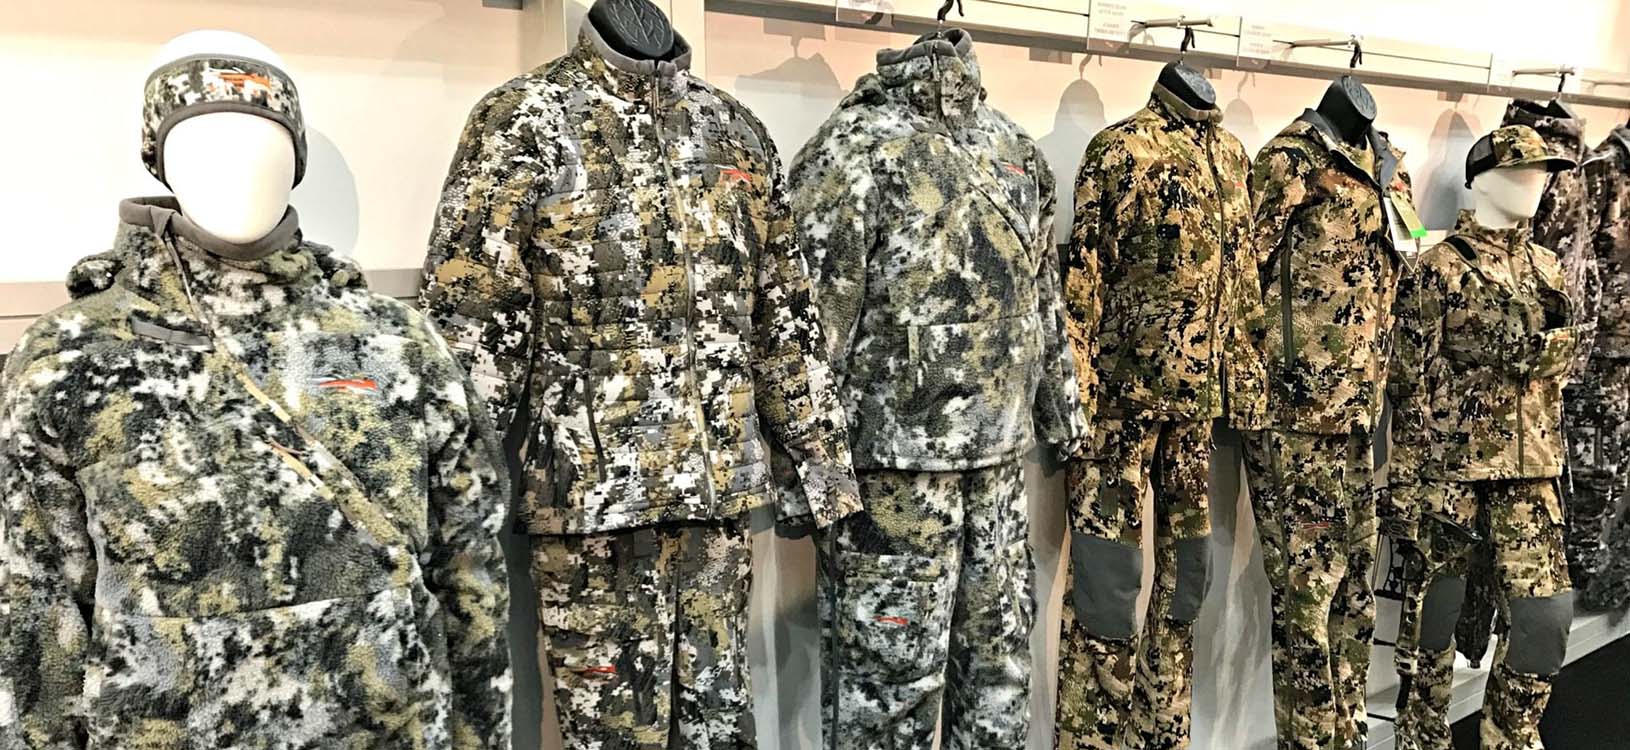 The best brands of clothing for hunters. The best hunter clothing brands.